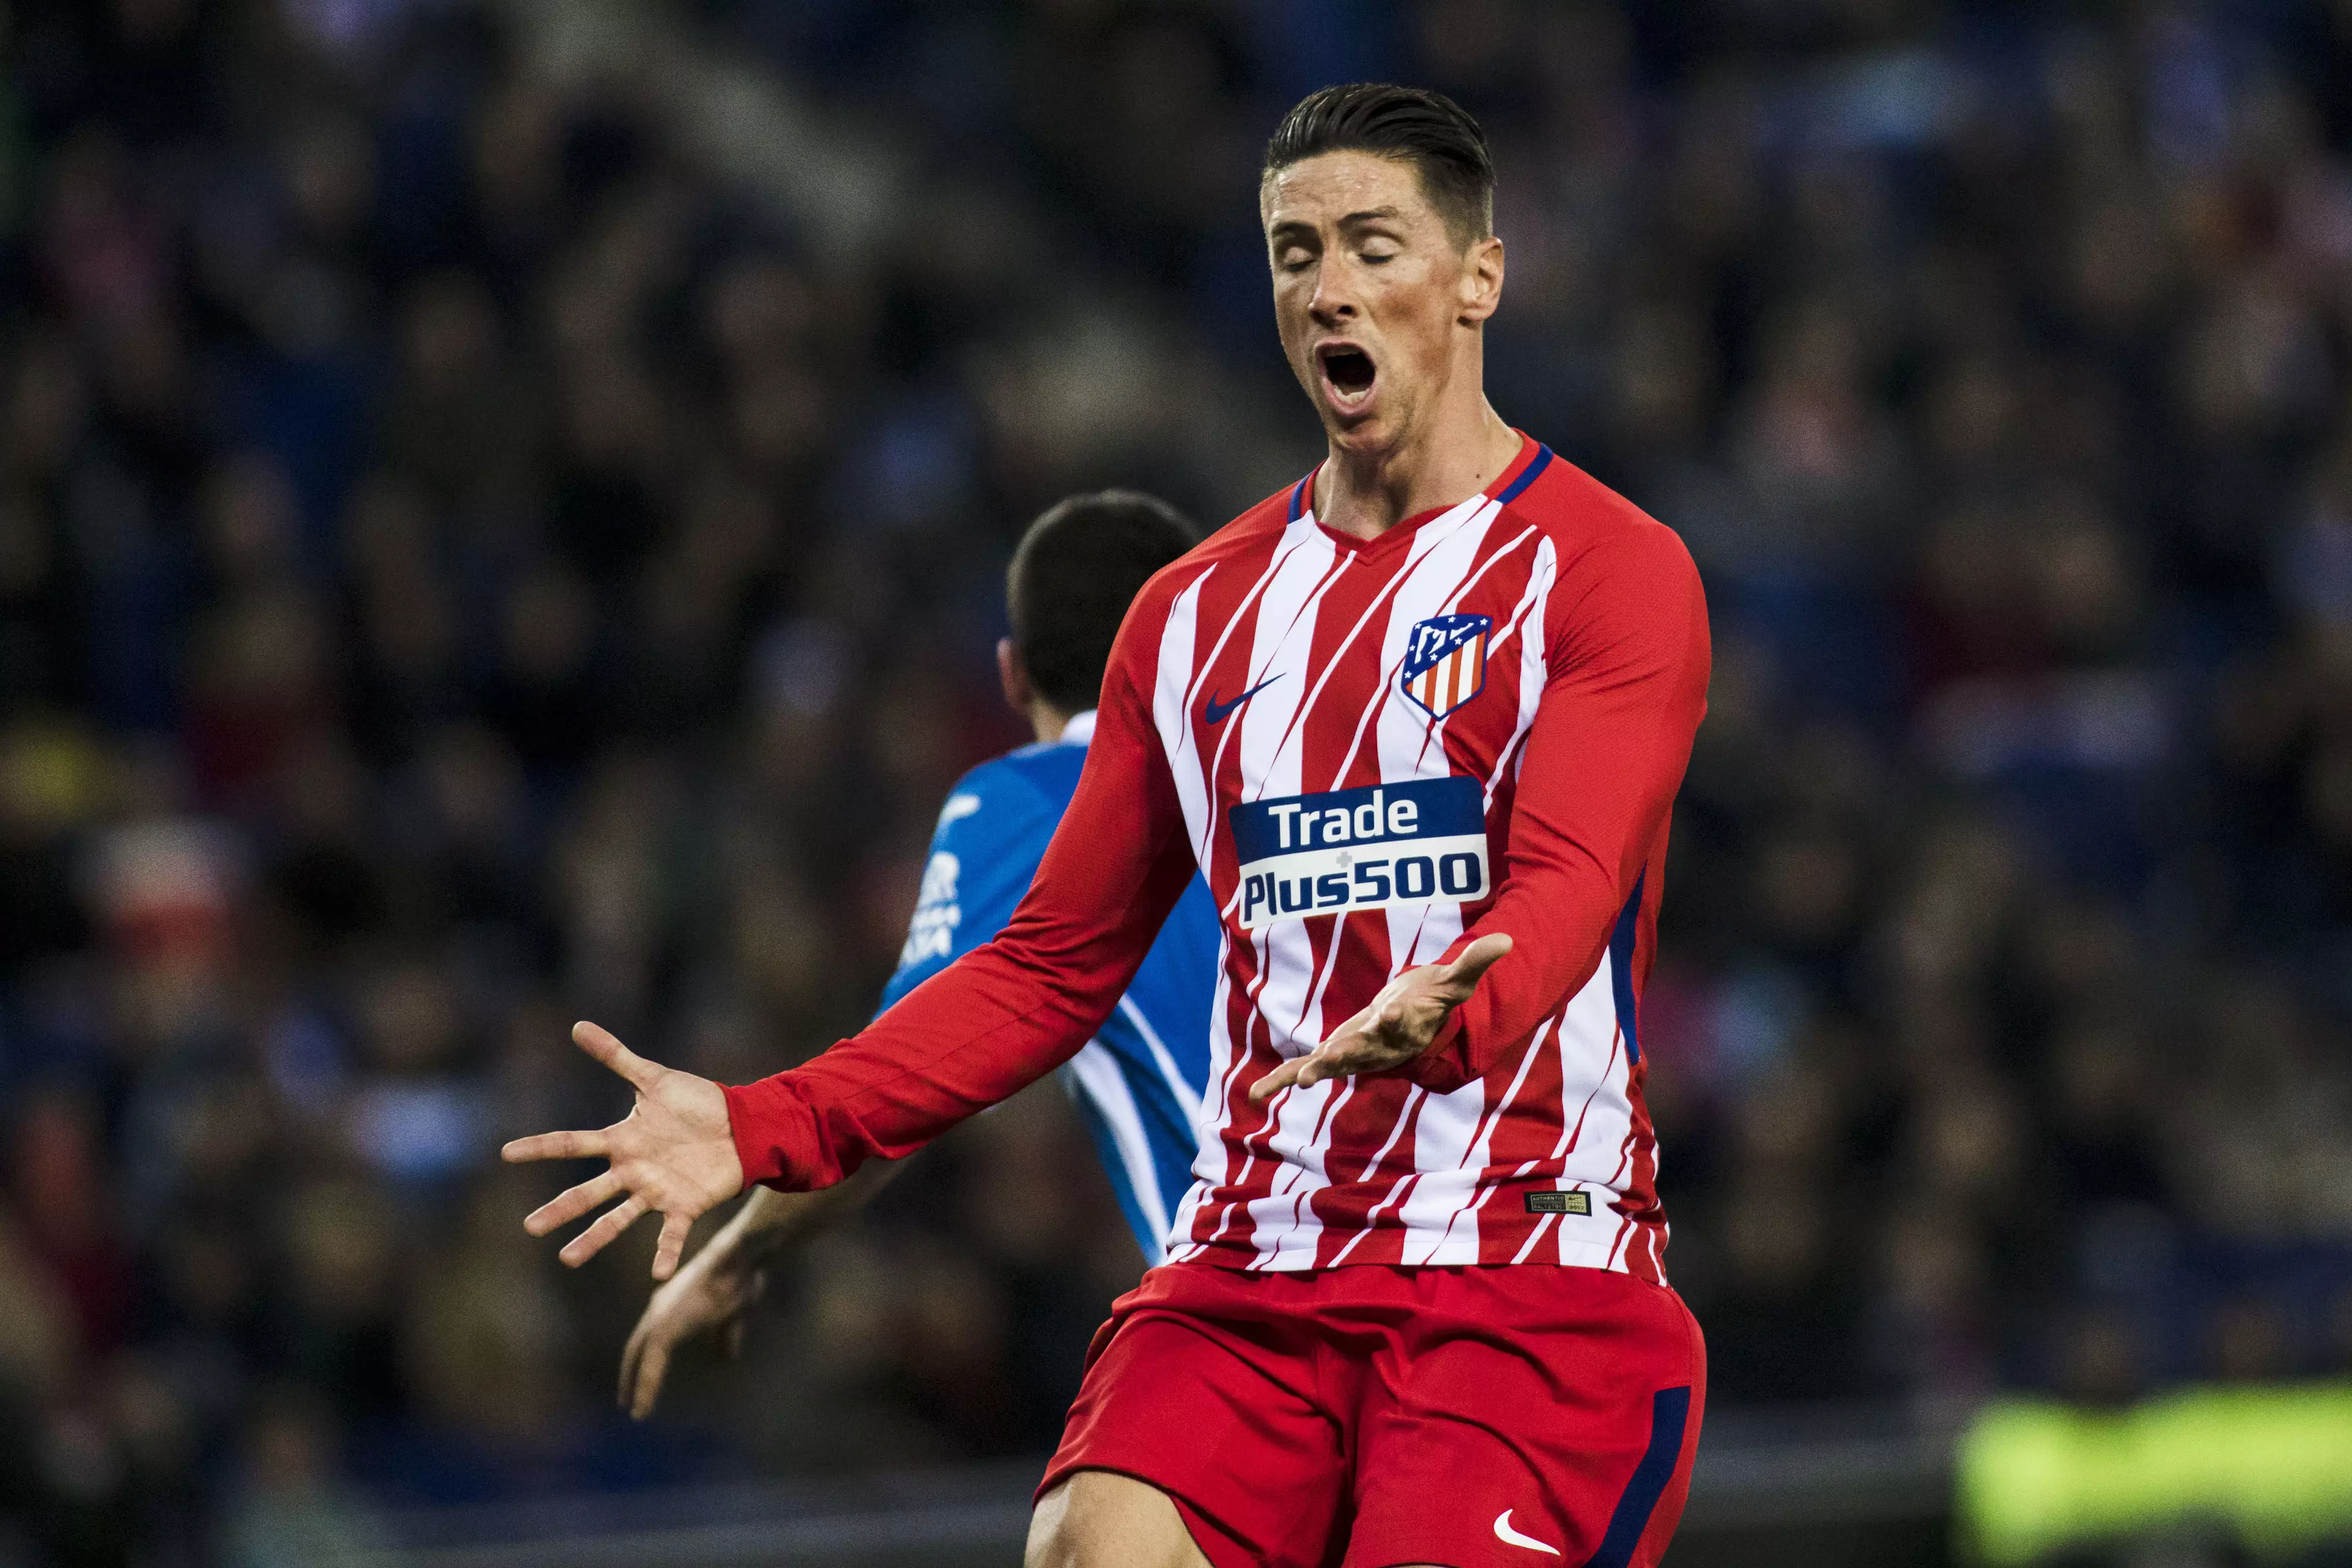 Torres in action for Atletico Madrid. Image: PA